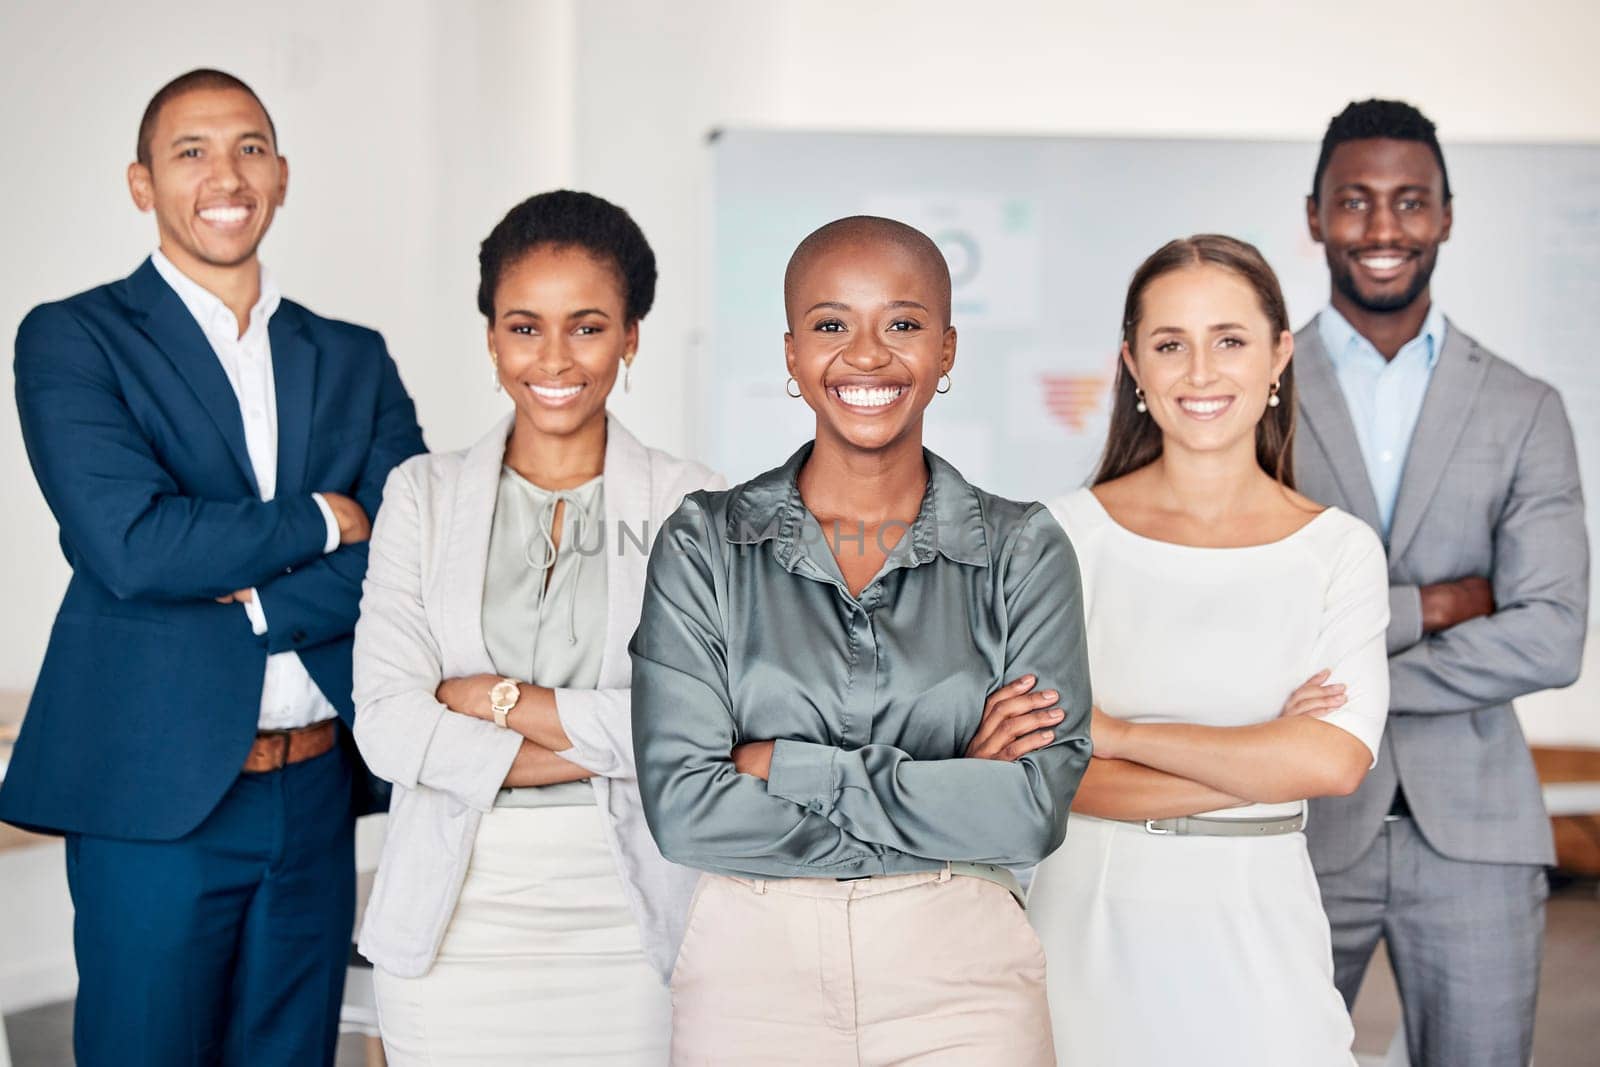 Business team portrait, people smile in professional office and global company diversity in Toronto boardroom. Black woman in leadership career, happy corporate staff together.and group success.